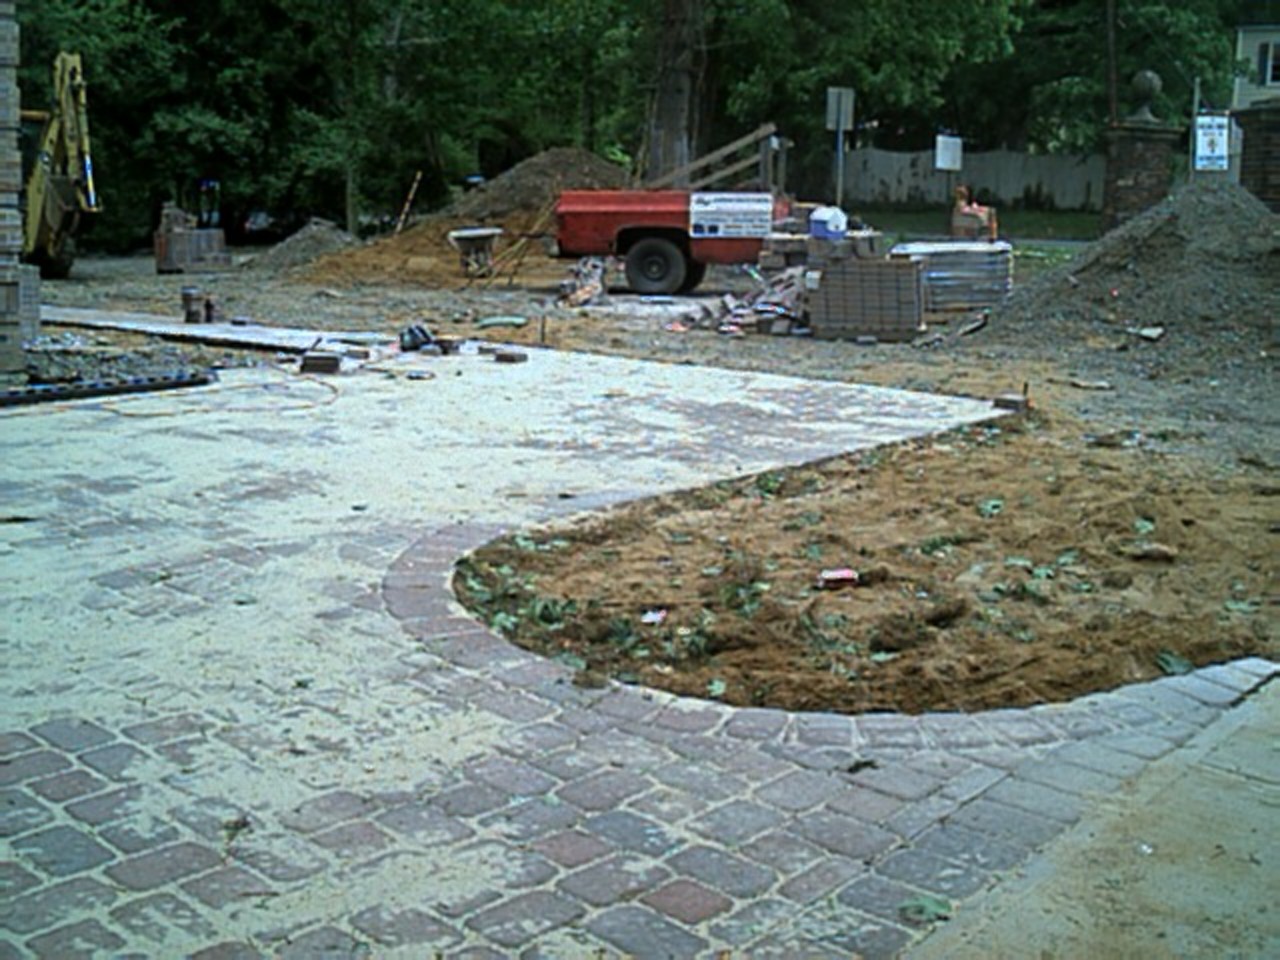 From the main entrance, the brick pavers curve into a parking section